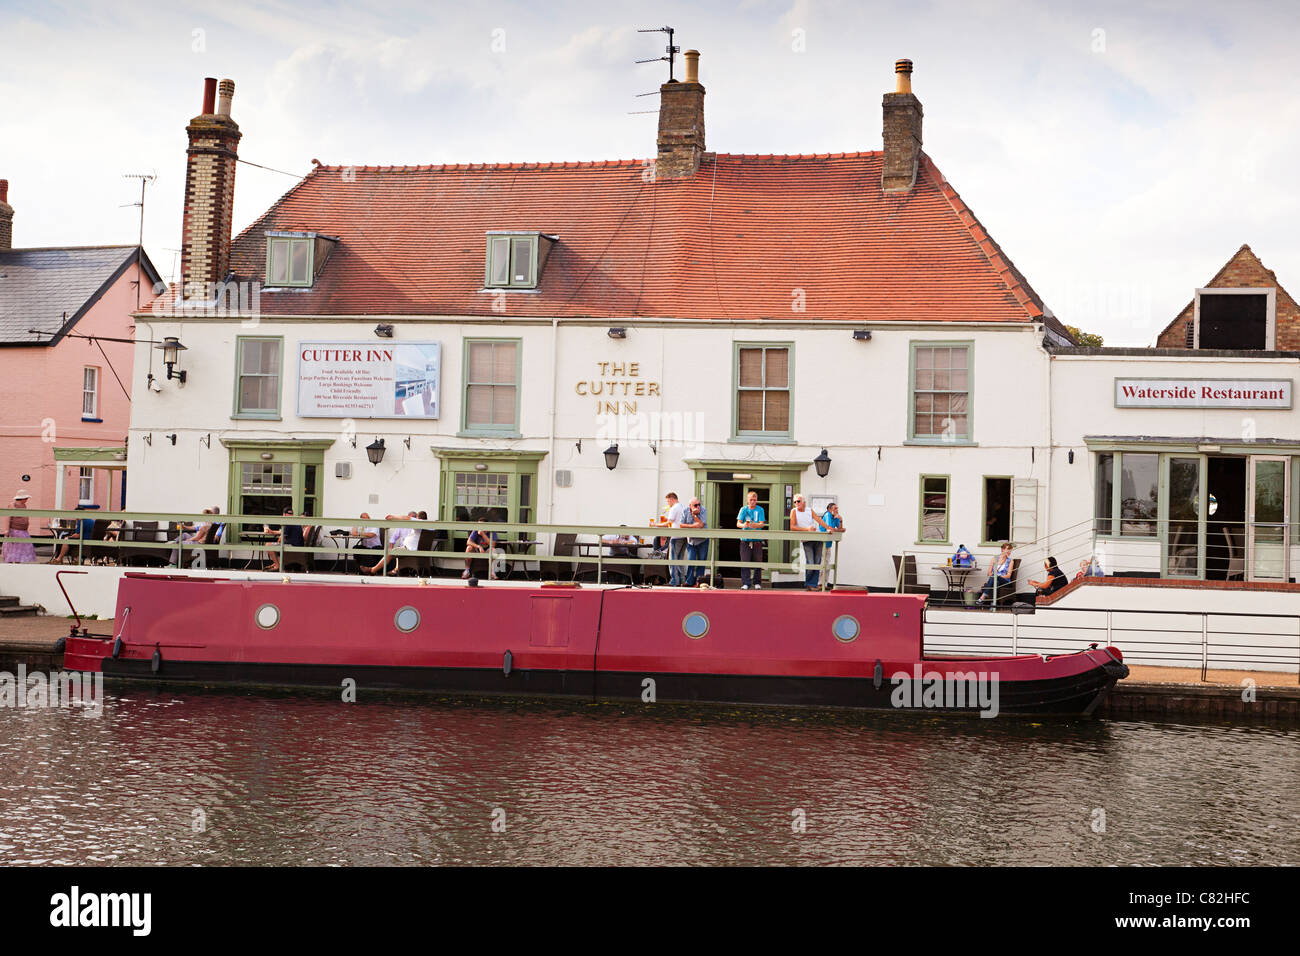 The Cutter Inn at Ely, Cambridgeshire, UK along the river Great Ouse Stock Photo